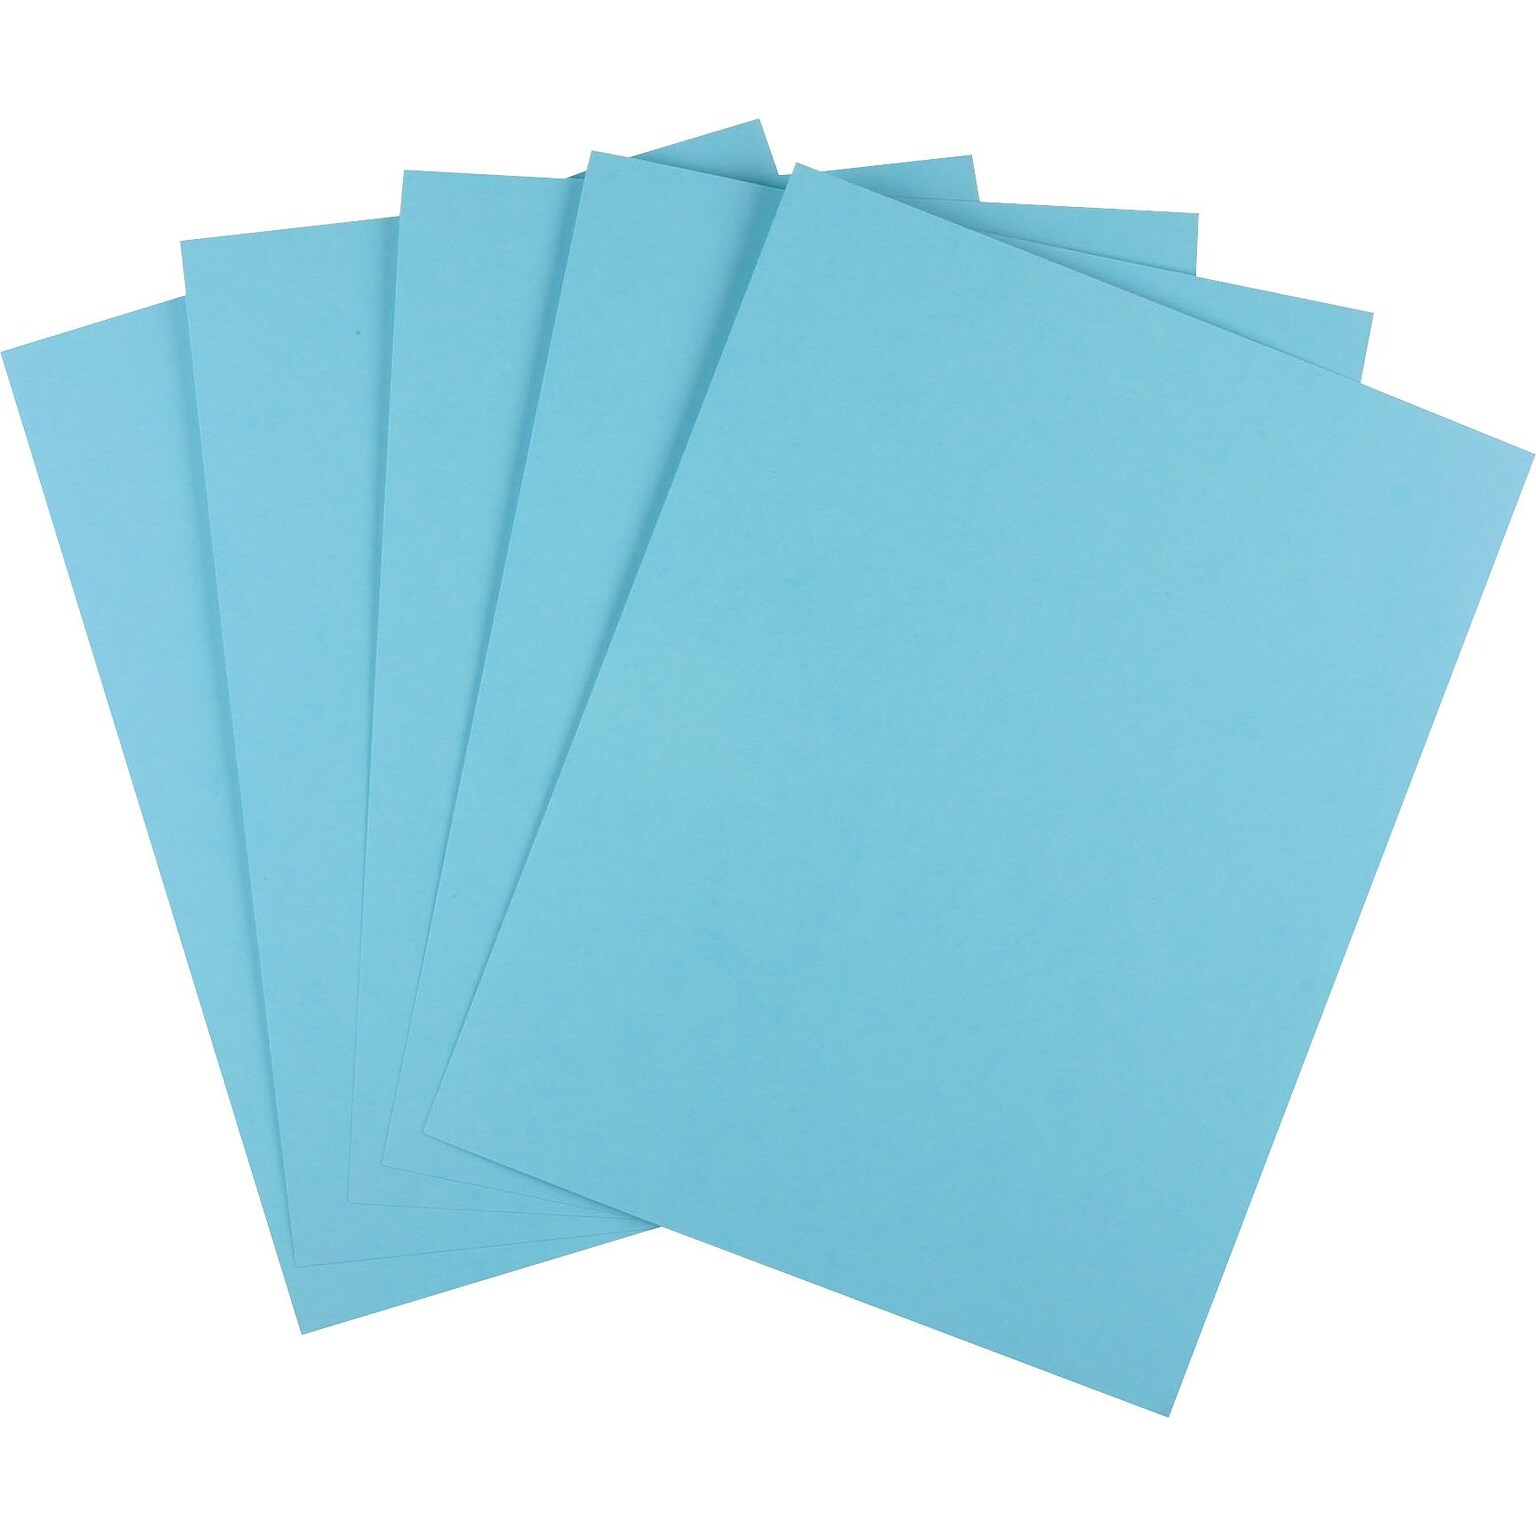 Staples Brights Multipurpose Paper, 20 lbs., 8.5 x 11, Blue, 500 Sheets/Ream, 5 Reams/Carton (25202CT)